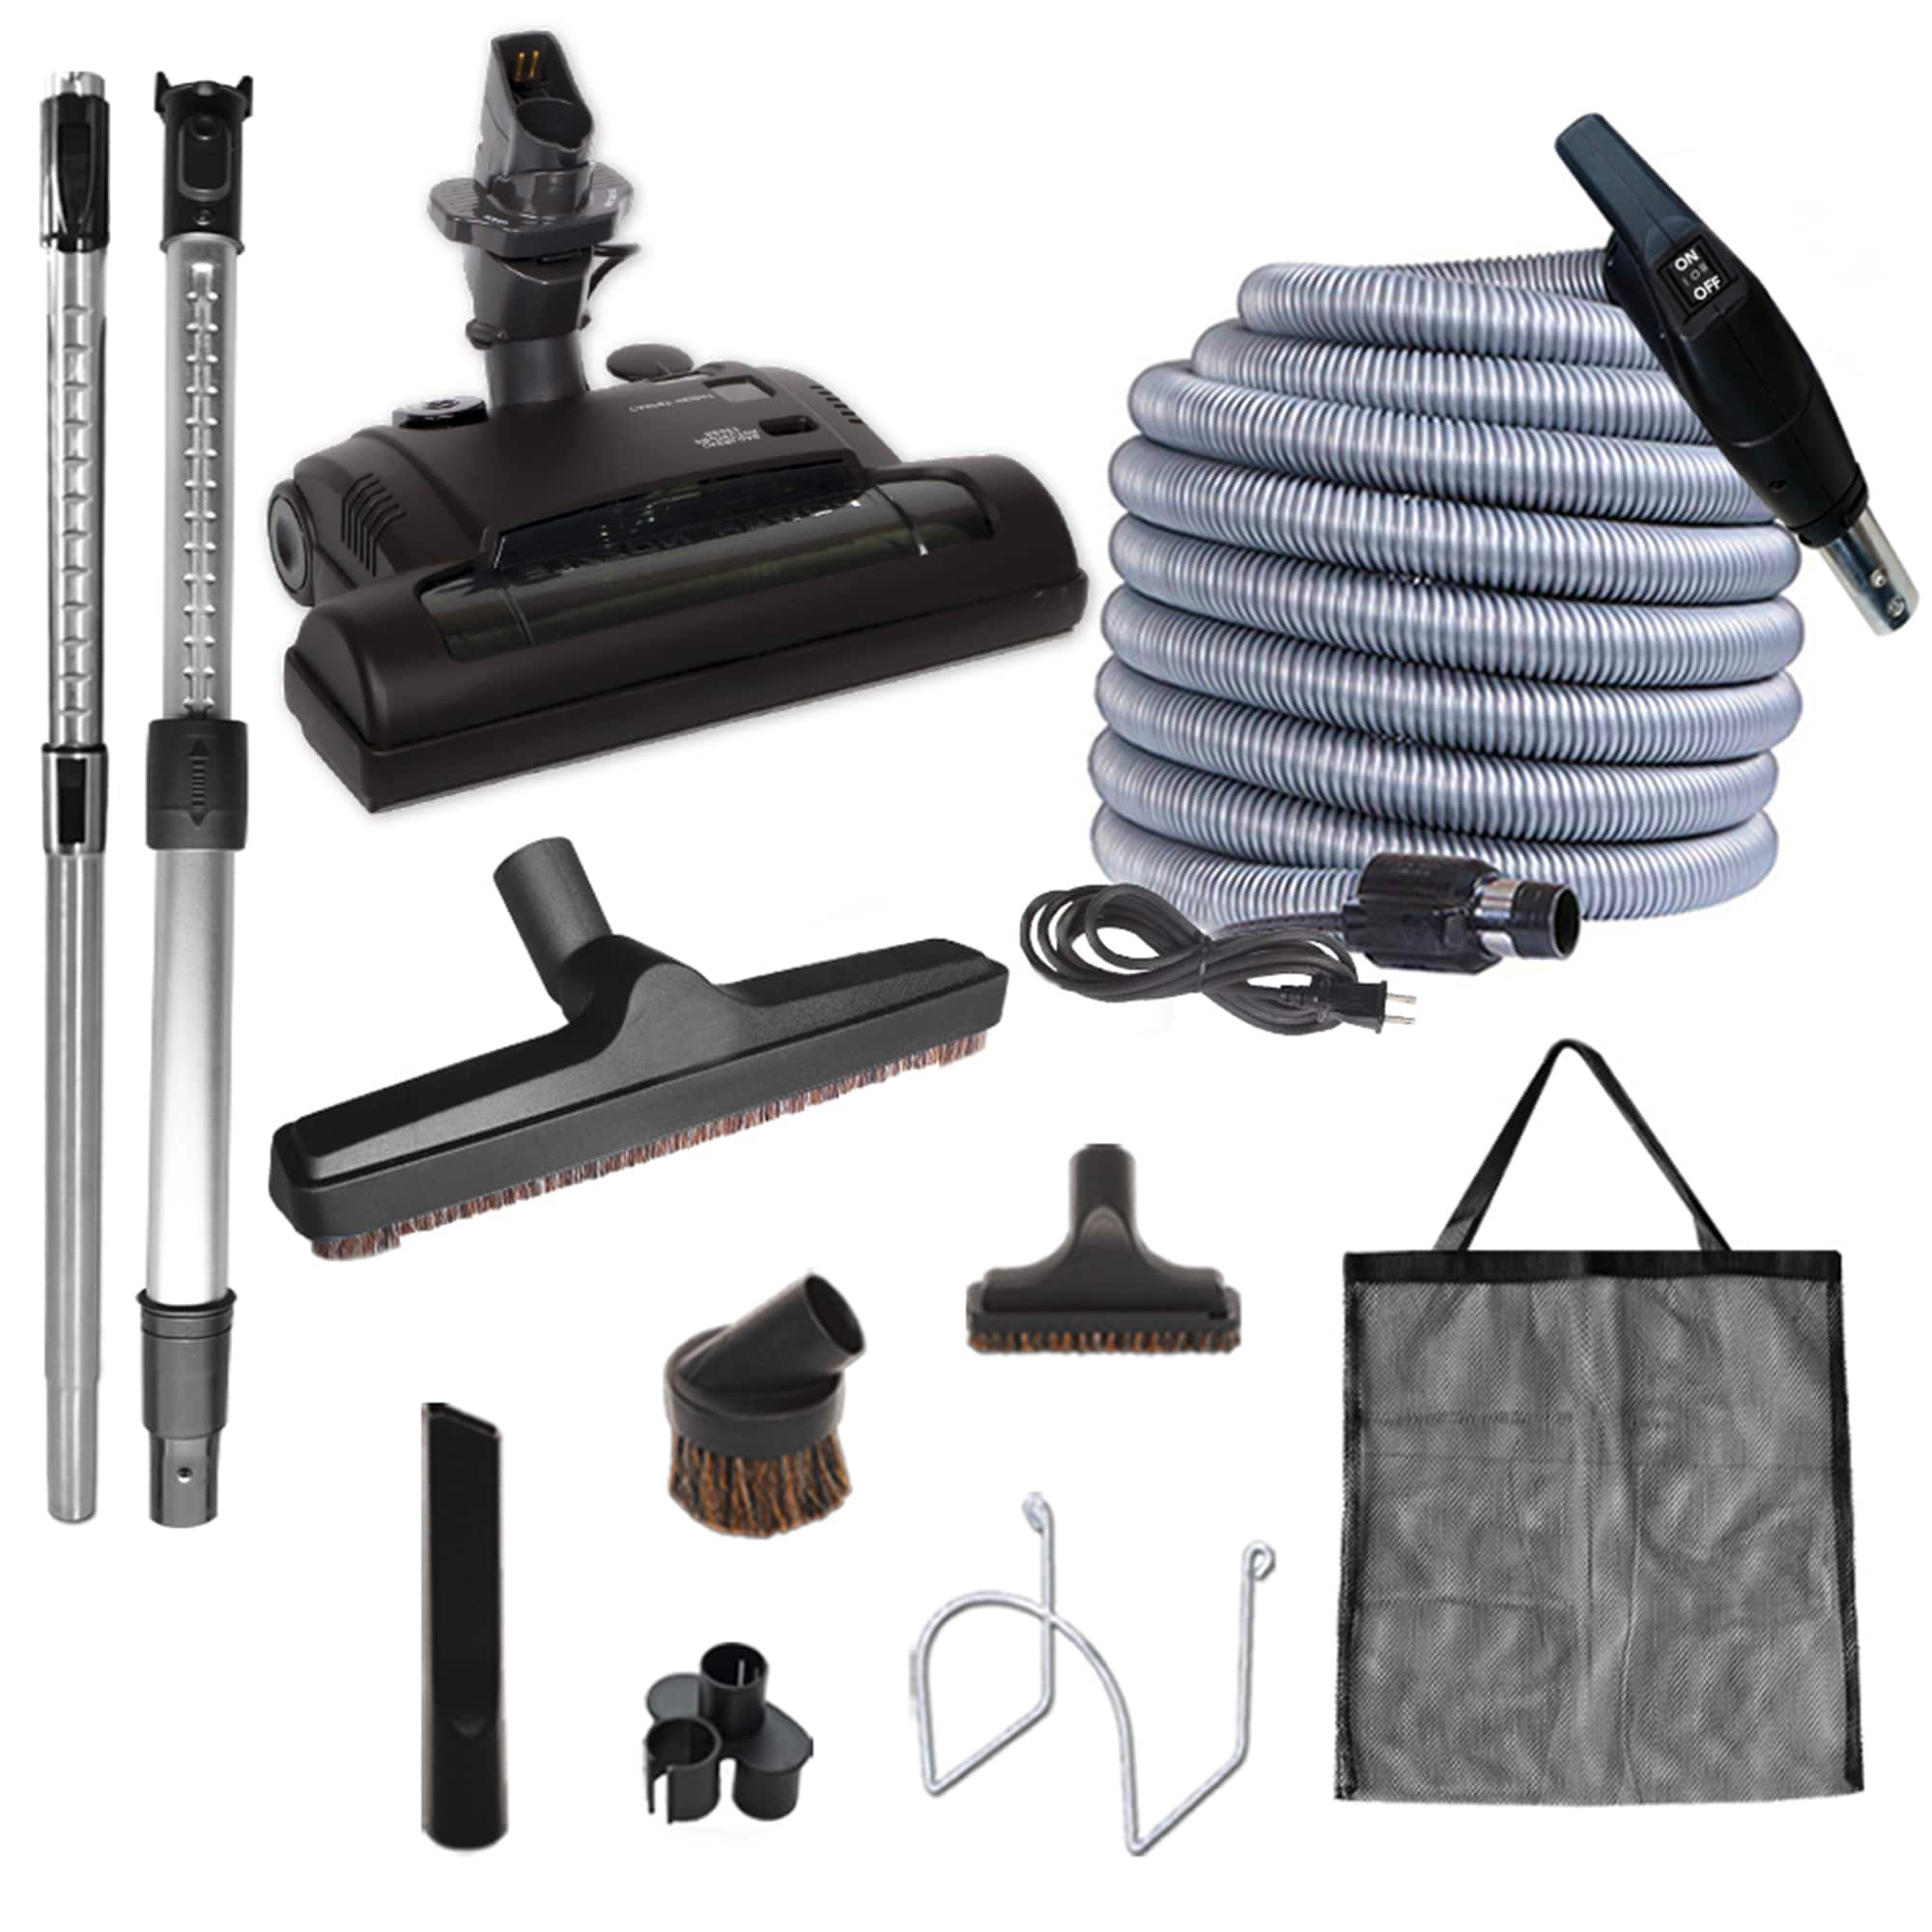 Cen-Tec Gray Attachment Kit with 35 ft. Hose for Central Vacuums 93367 -  The Home Depot